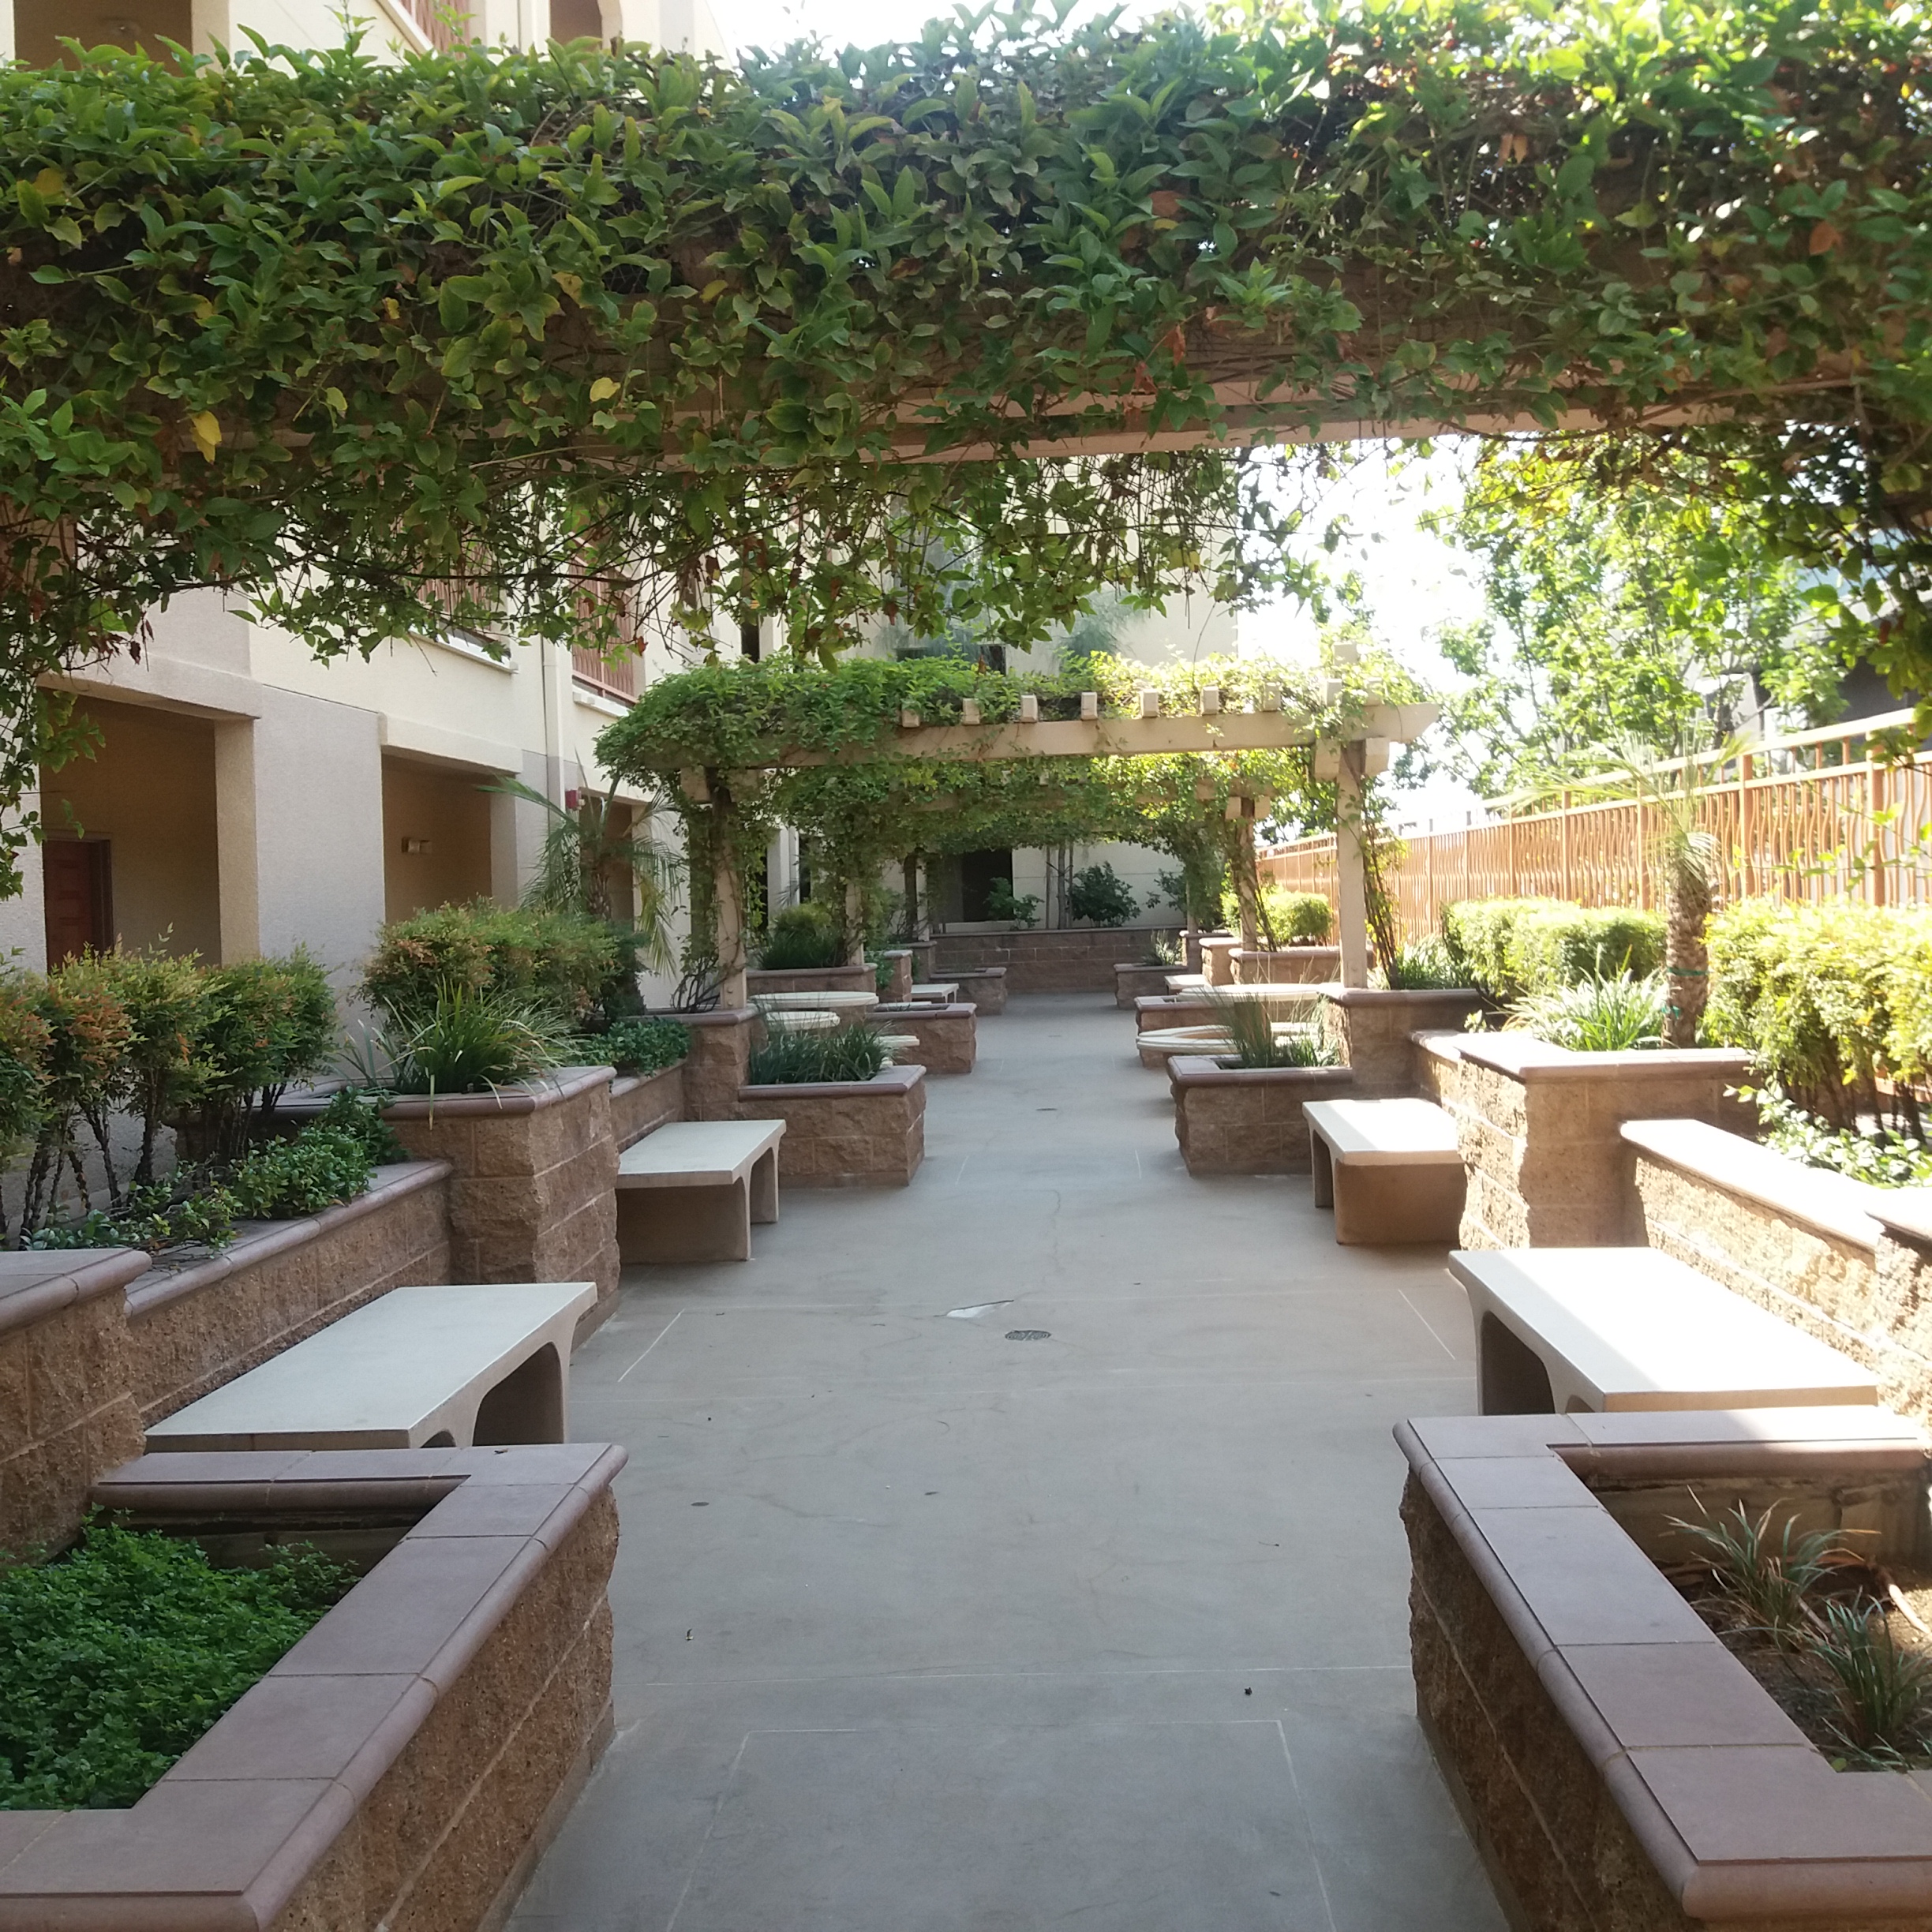 Courtyard with benches, overhead sections of plants, and bricked sections for plants.